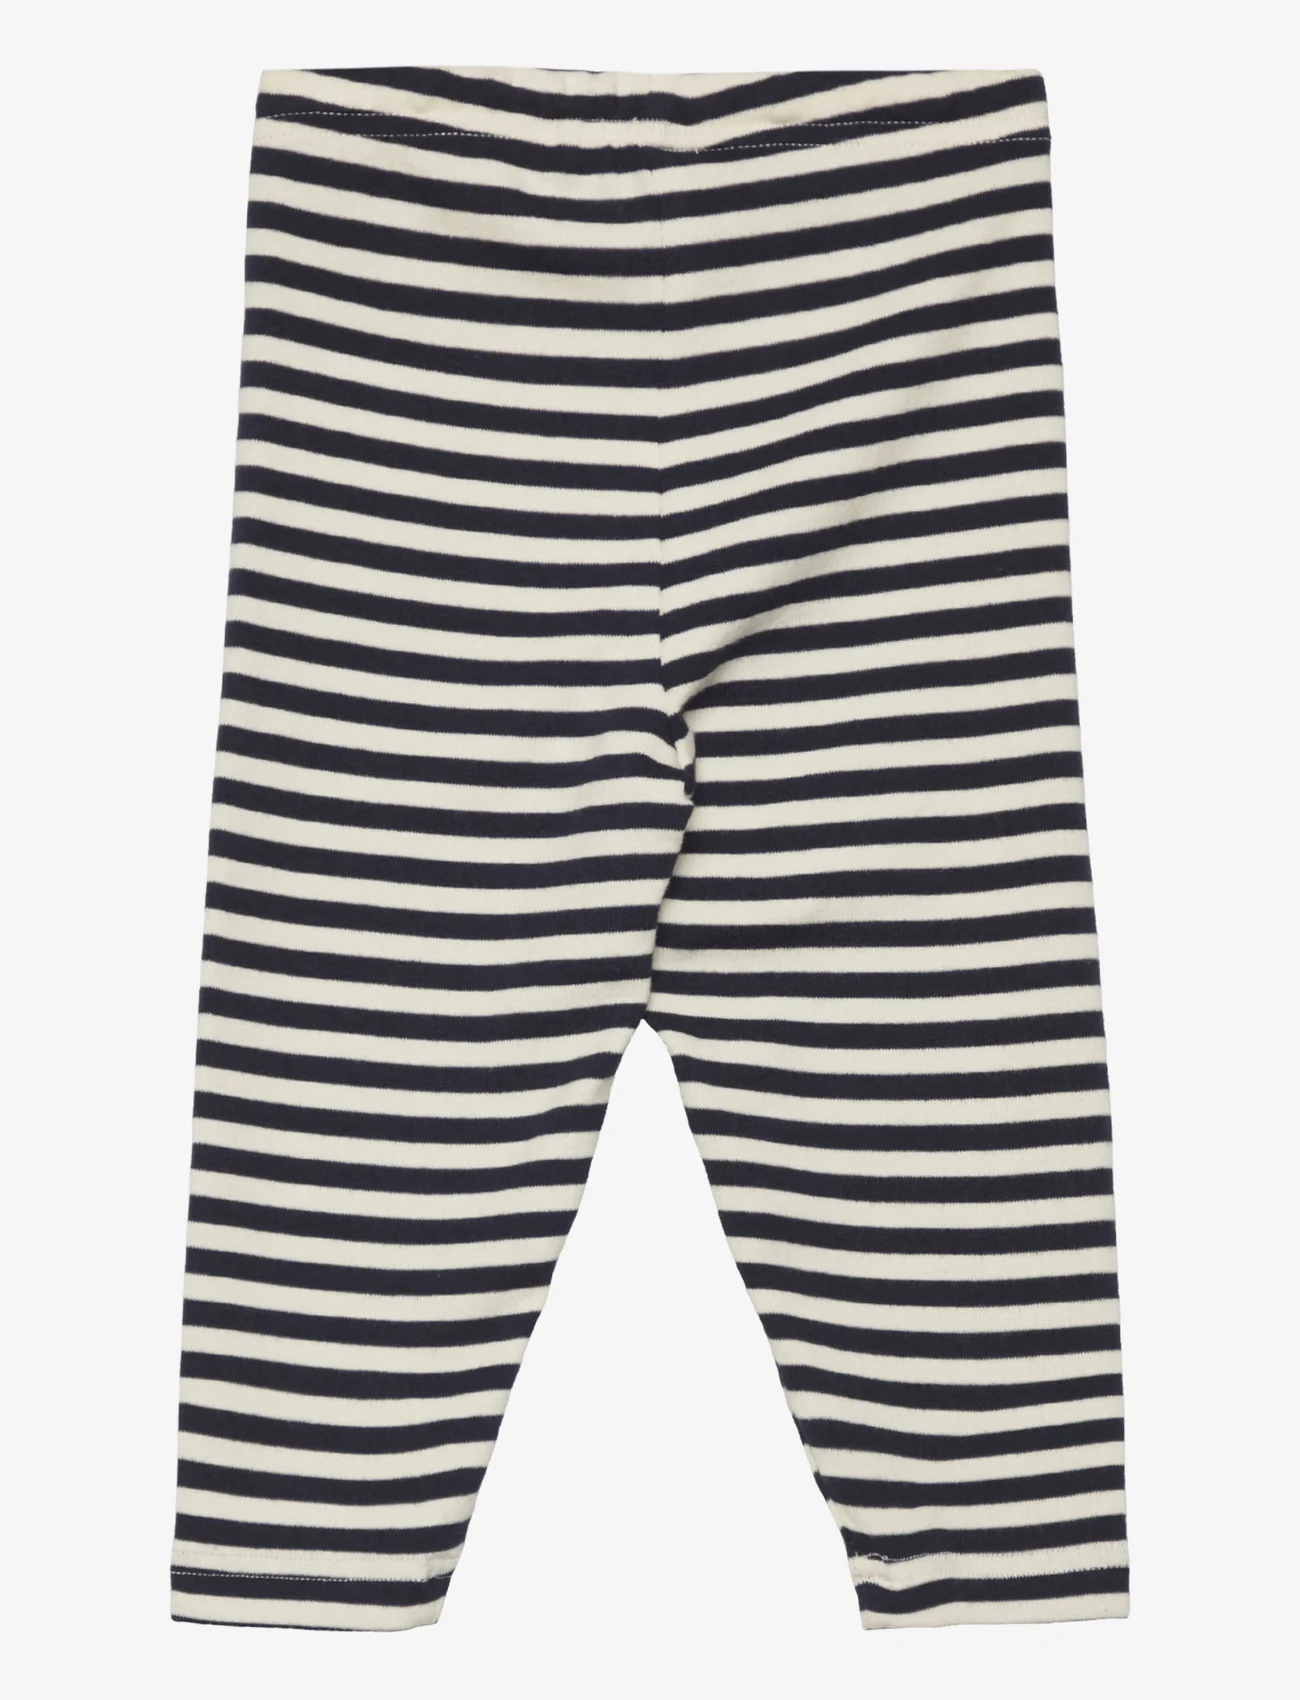 Sofie Schnoor Baby and Kids - Trousers - baby trousers - dark blue - 1